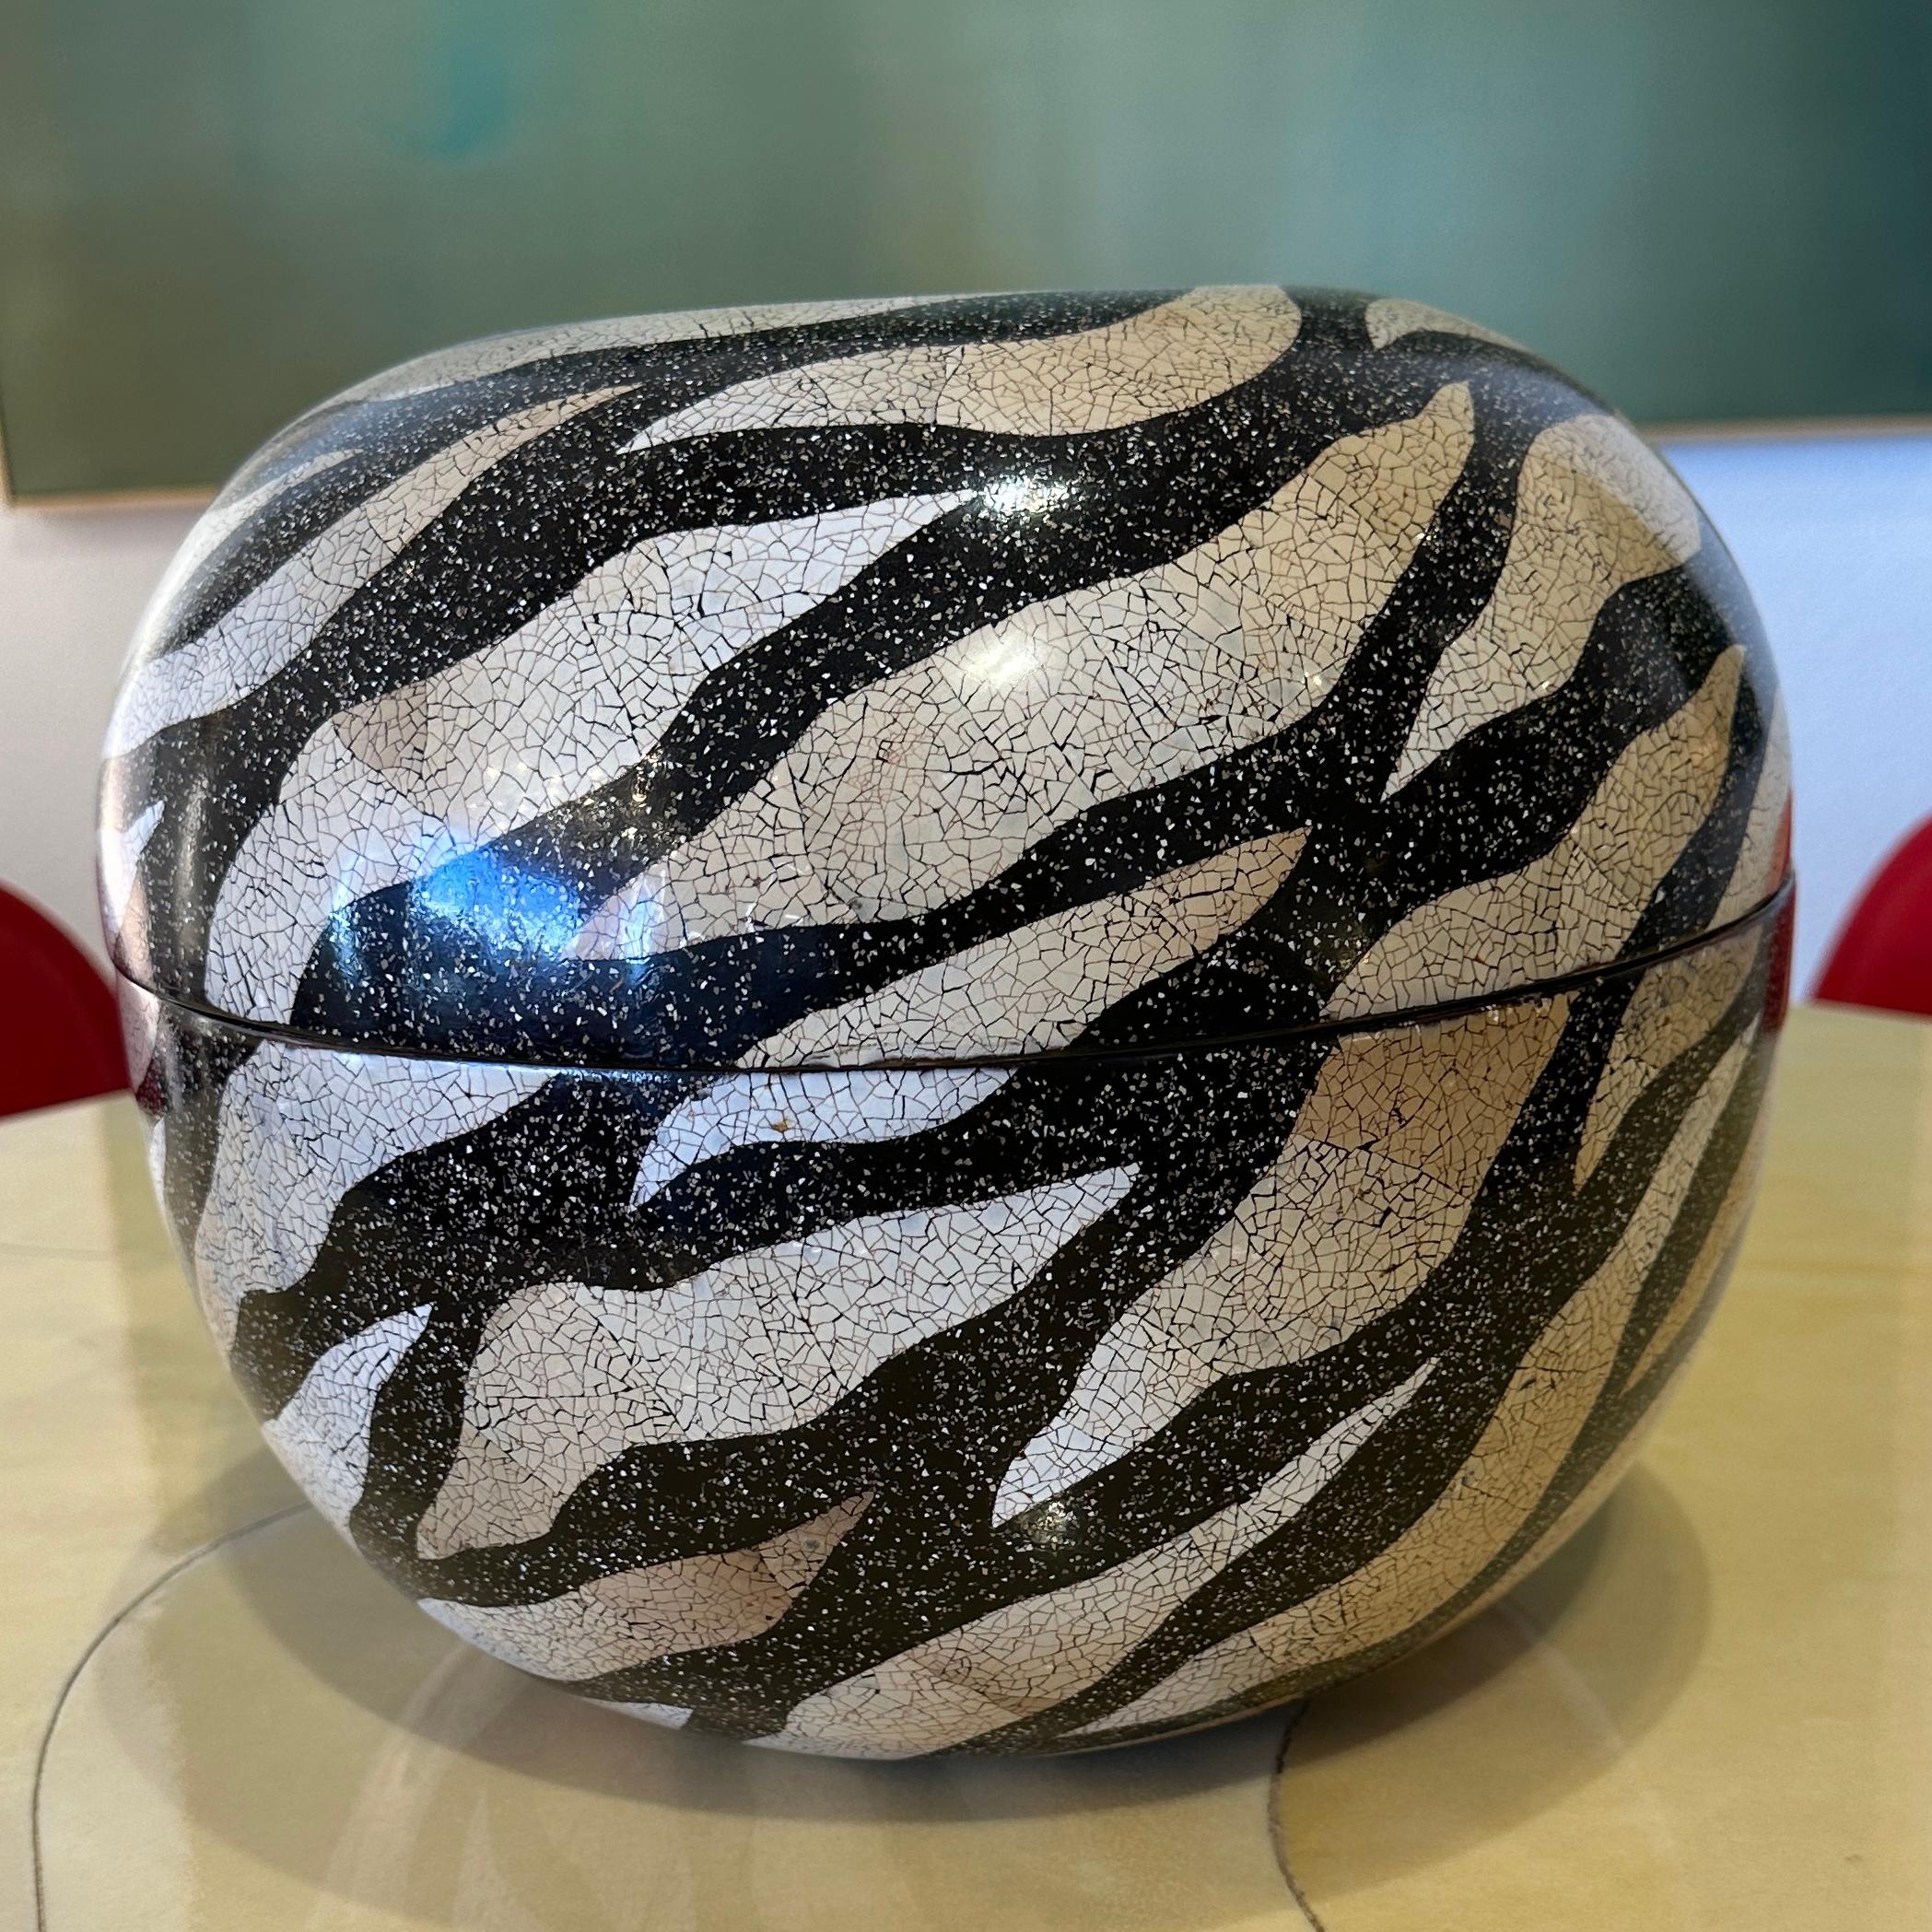 This is a stunning lidded box manufactured in Vietnam for Theodore Alexander. The box features eggshell lacquer exterior in a gorgeous zebra stripe design in colors of off white, taupe, light brown and black. The interior is a solid black lacquer.